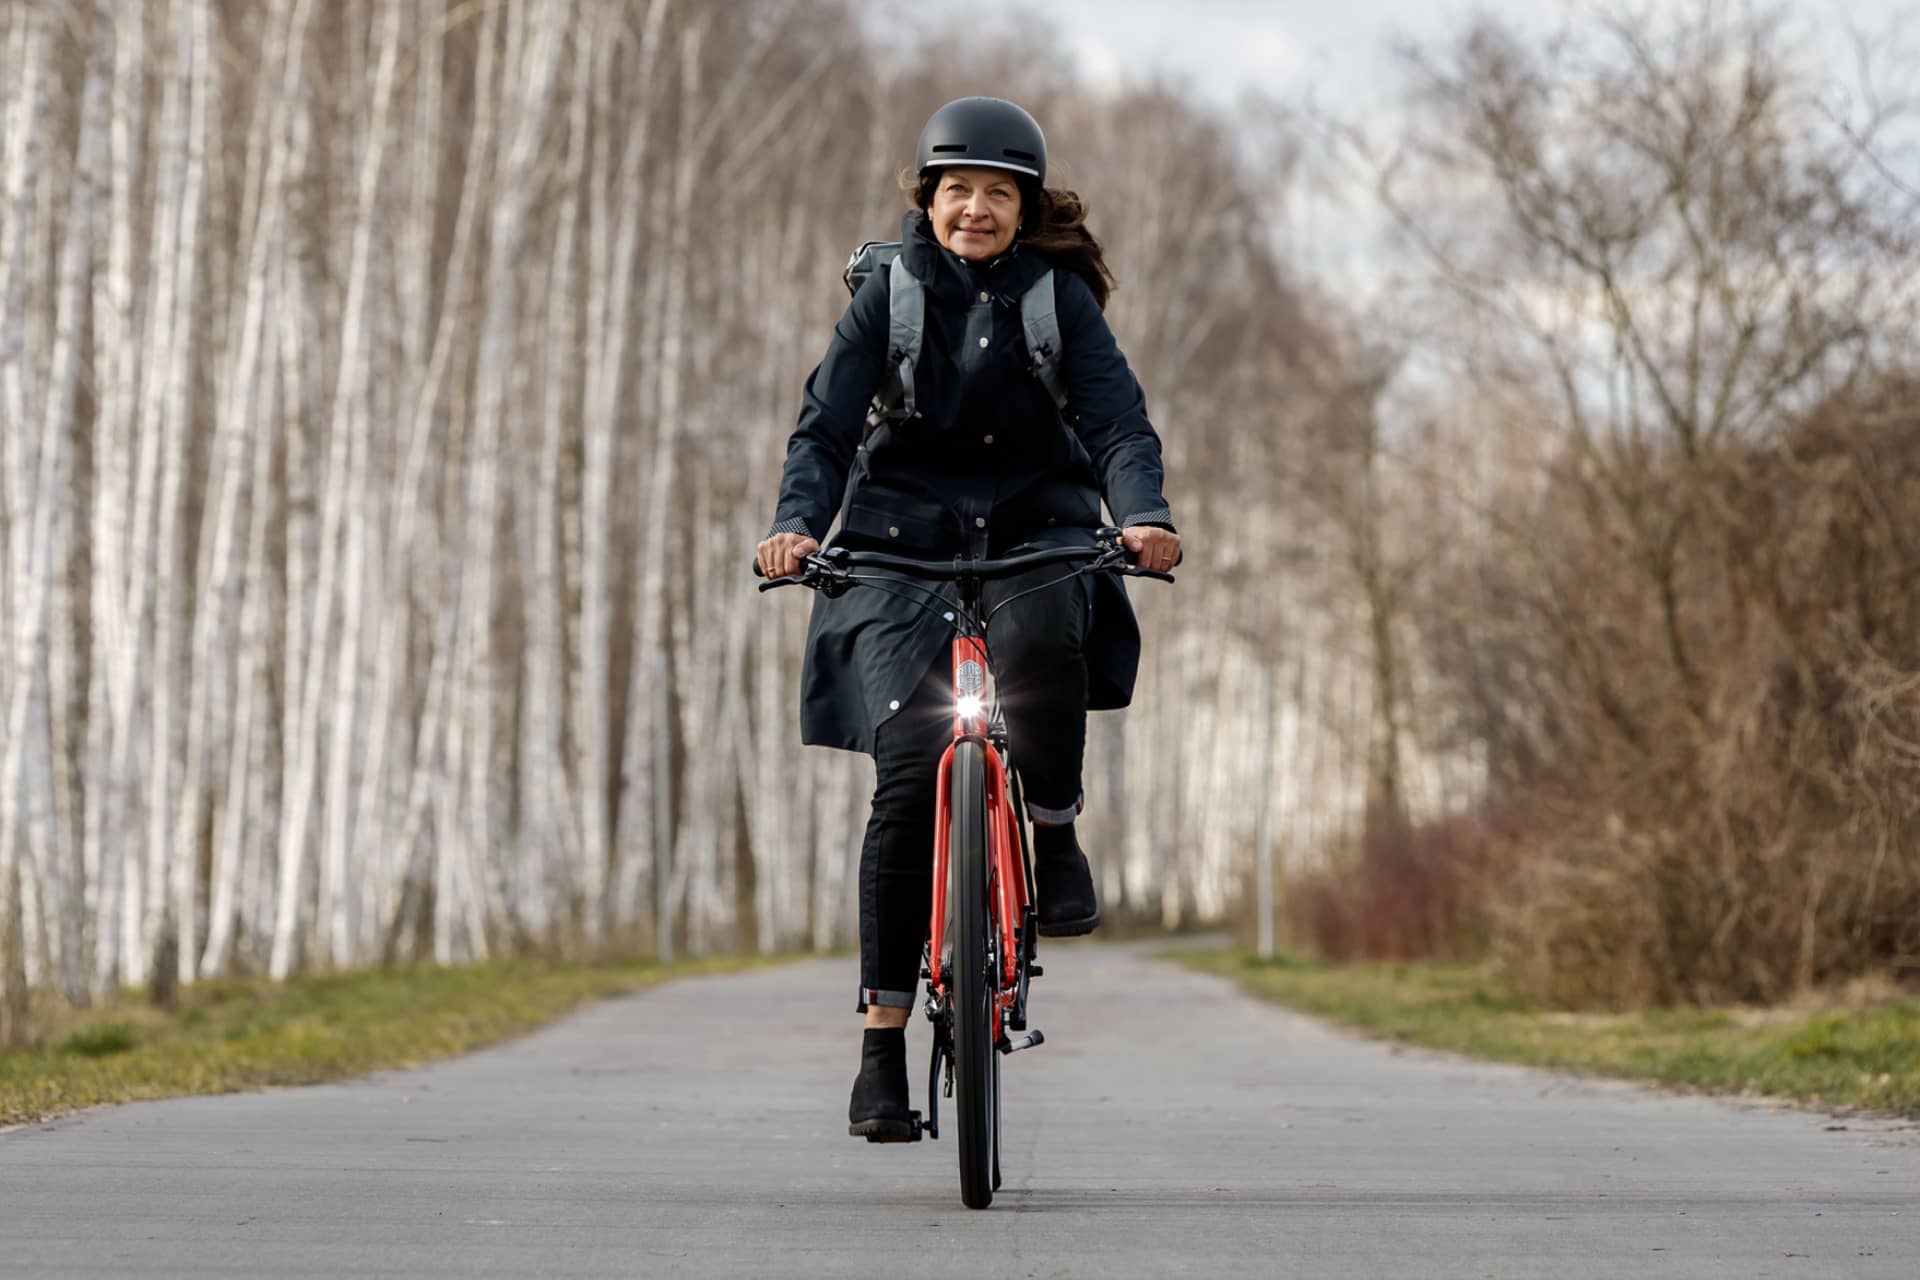 E Bike Benefits Why You Should Ride An Electric Bicycle Ampler Bikes 